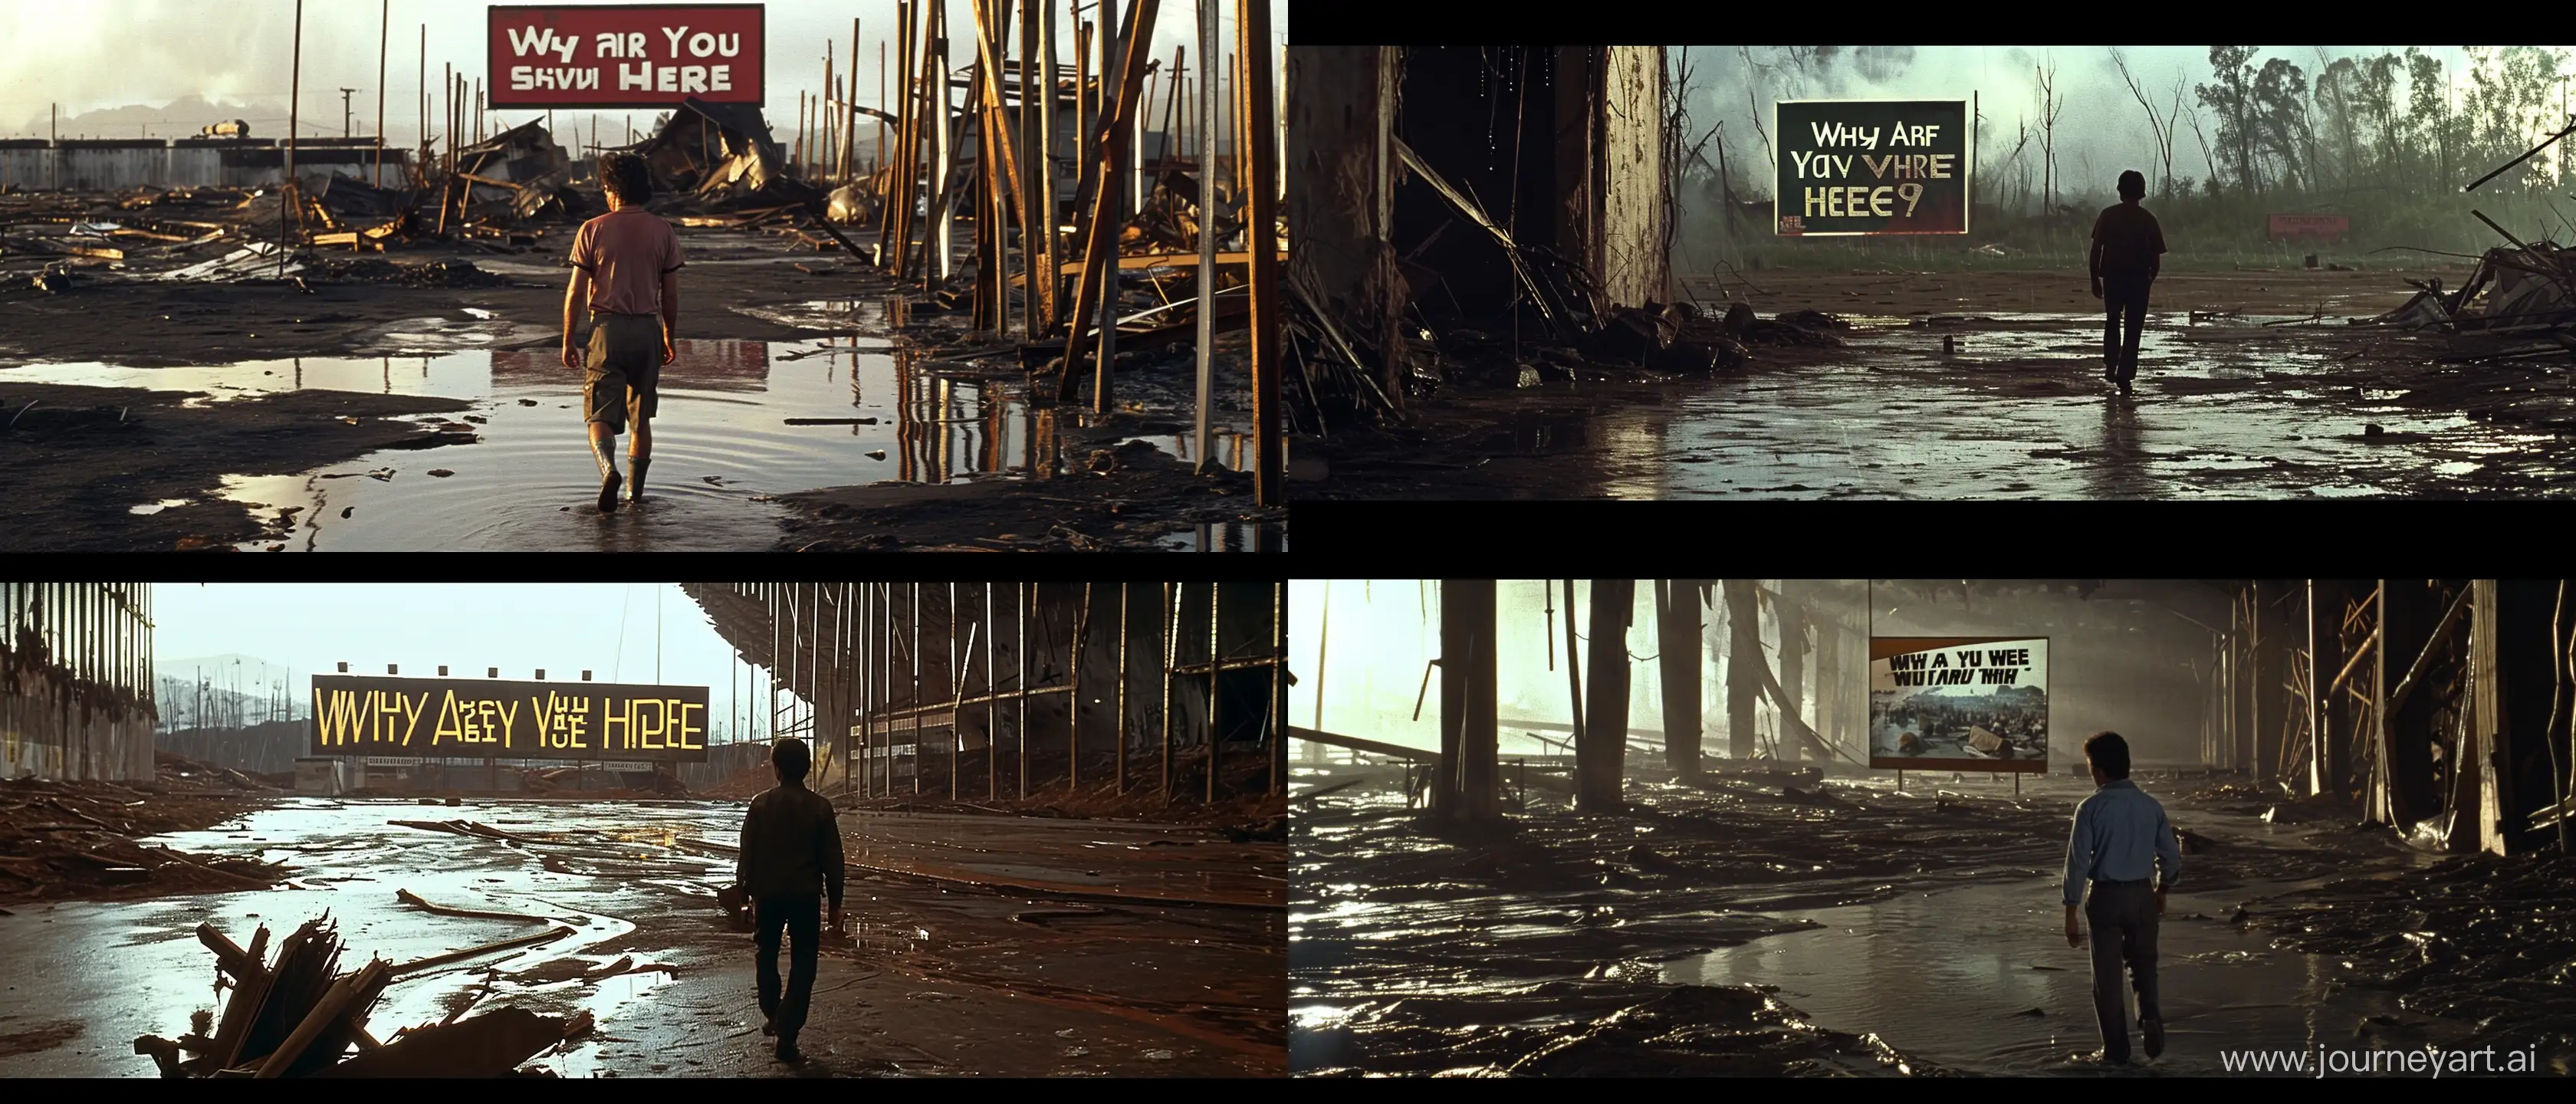 A scene from a 1976 science fiction film in which a man walks through a version of his homeland that is destroyed, wet and dirty, covered in endless toxic rain. The man is apparently worried about his family and devastated by the way the place looks now. Behind him, an eye-catching billboard reads "Why Are You Still Here?" --ar 21:9